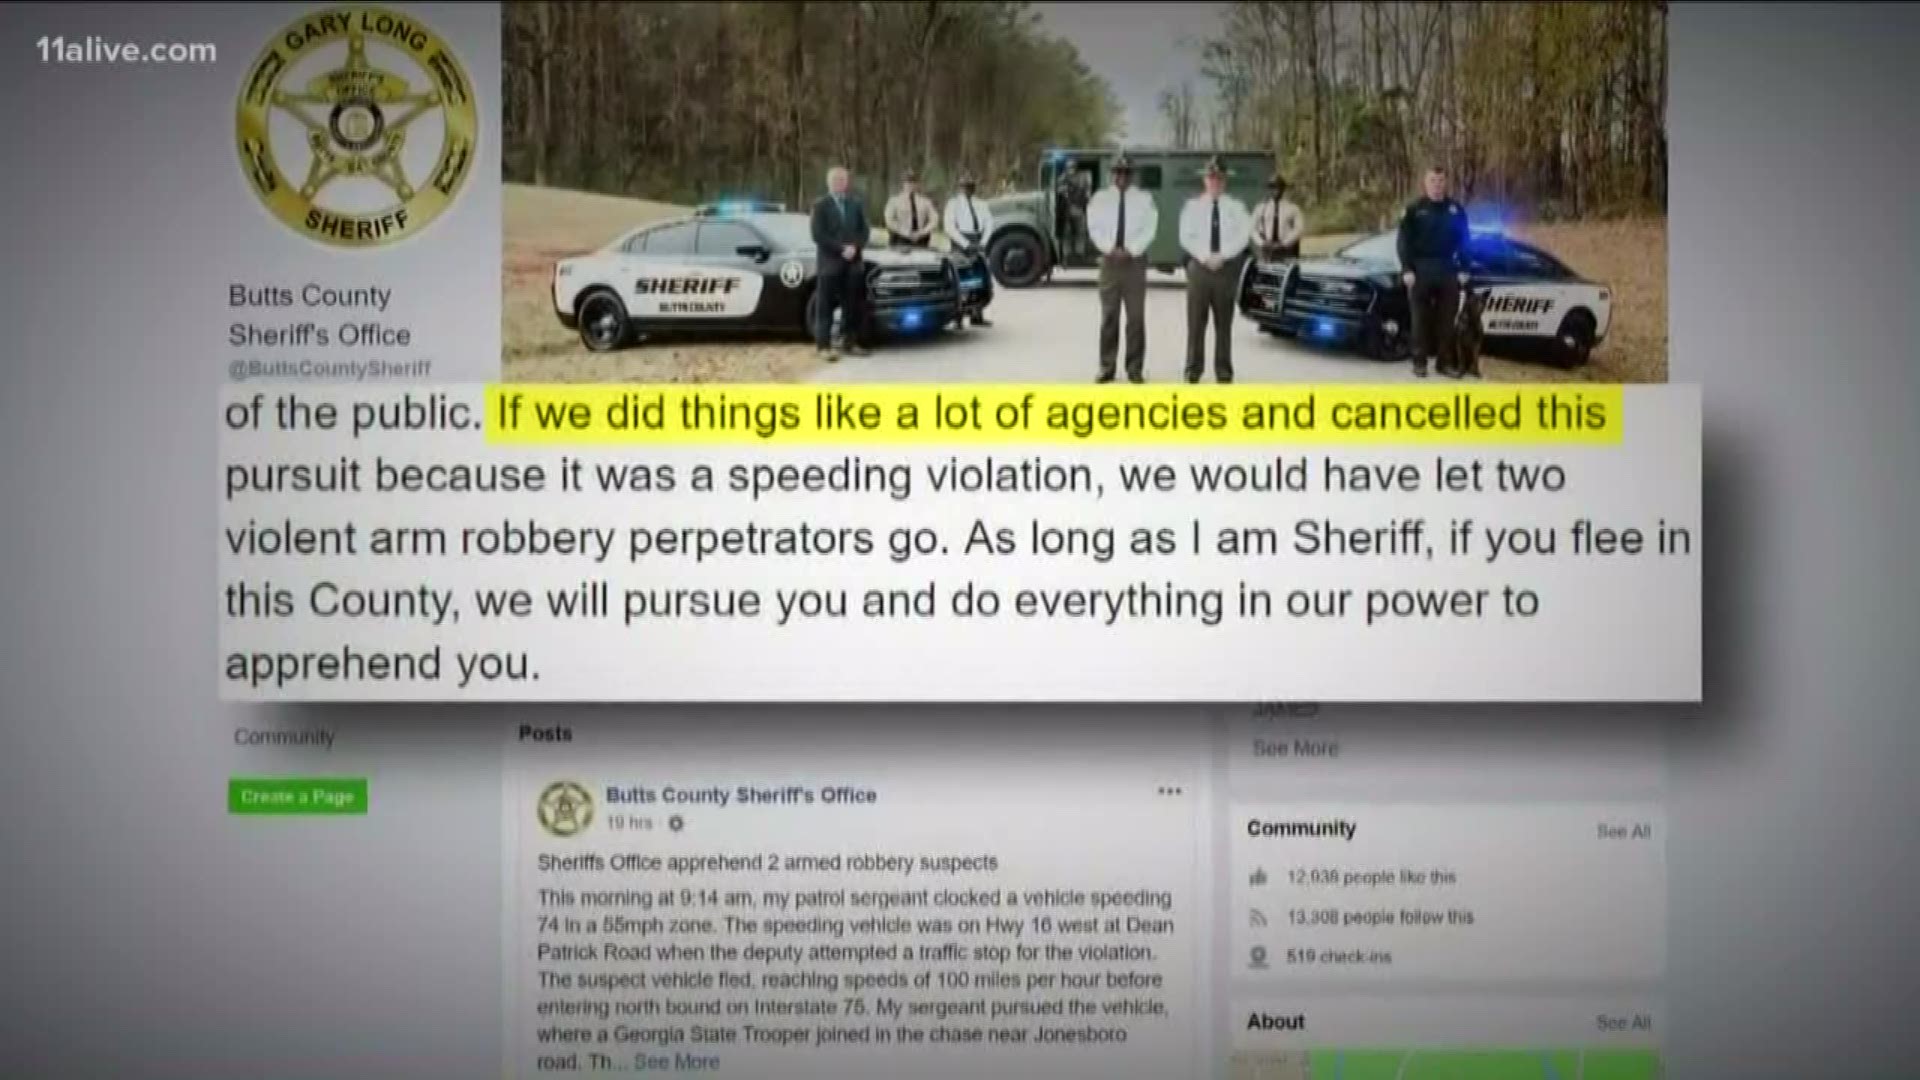 A Butts County Sheriff said he will always chase anyone that flees from one of their officers.